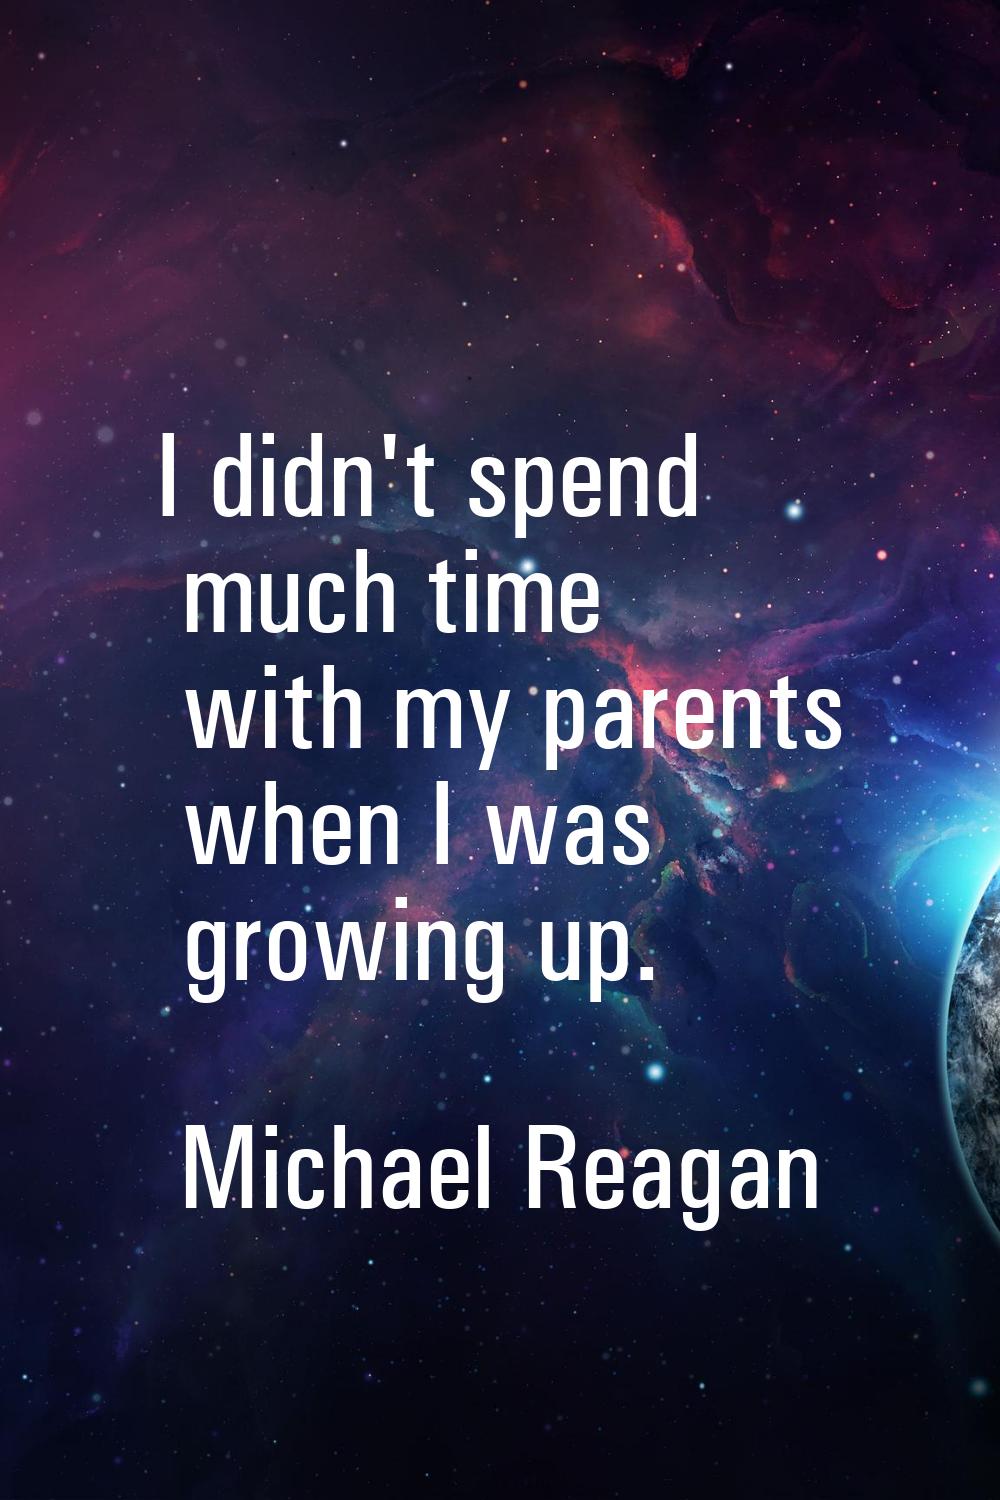 I didn't spend much time with my parents when I was growing up.